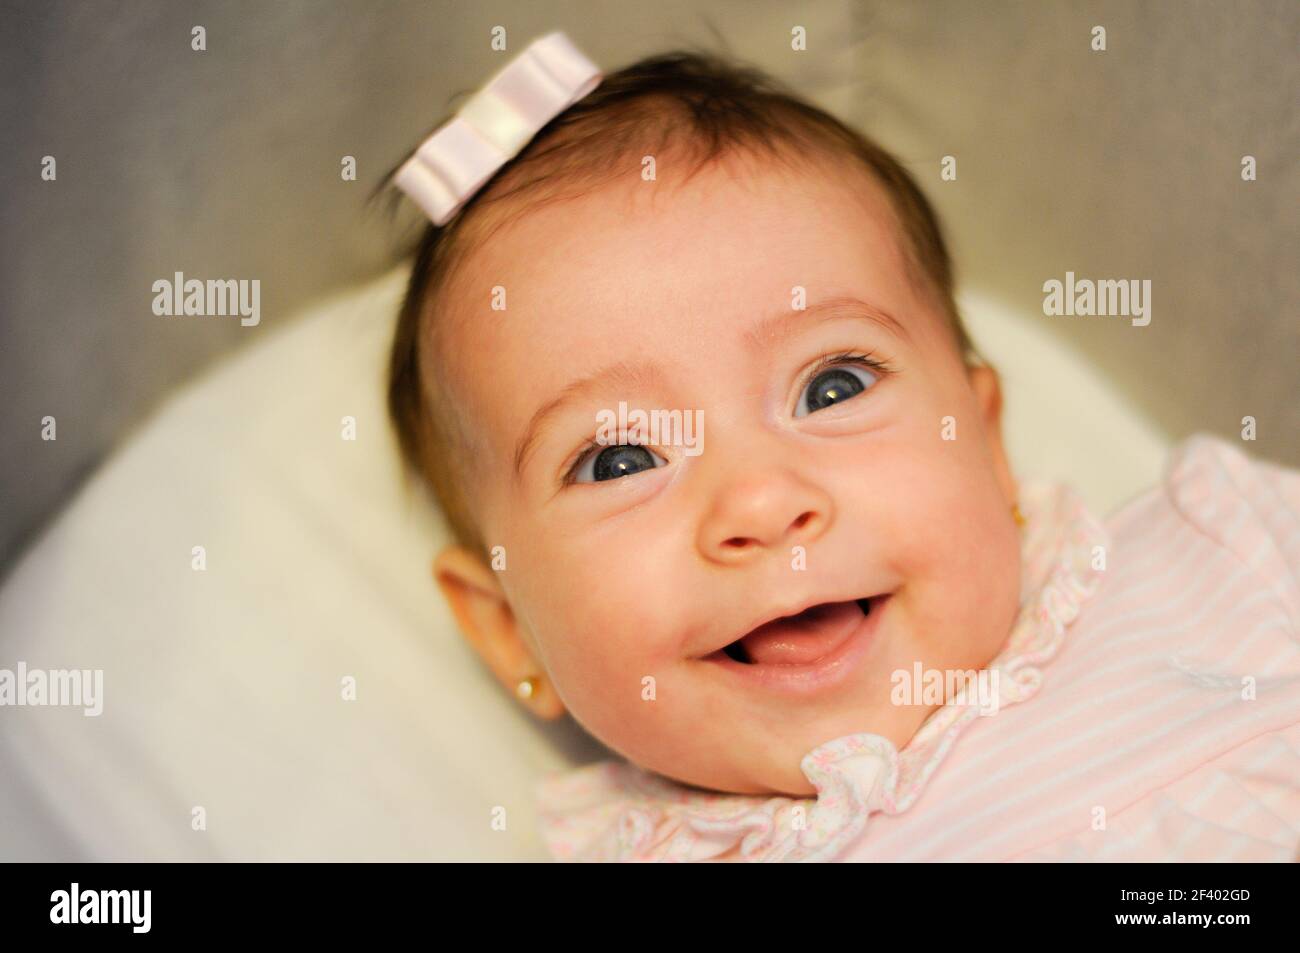 Baby girl two months old smiling indoors Stock Photo